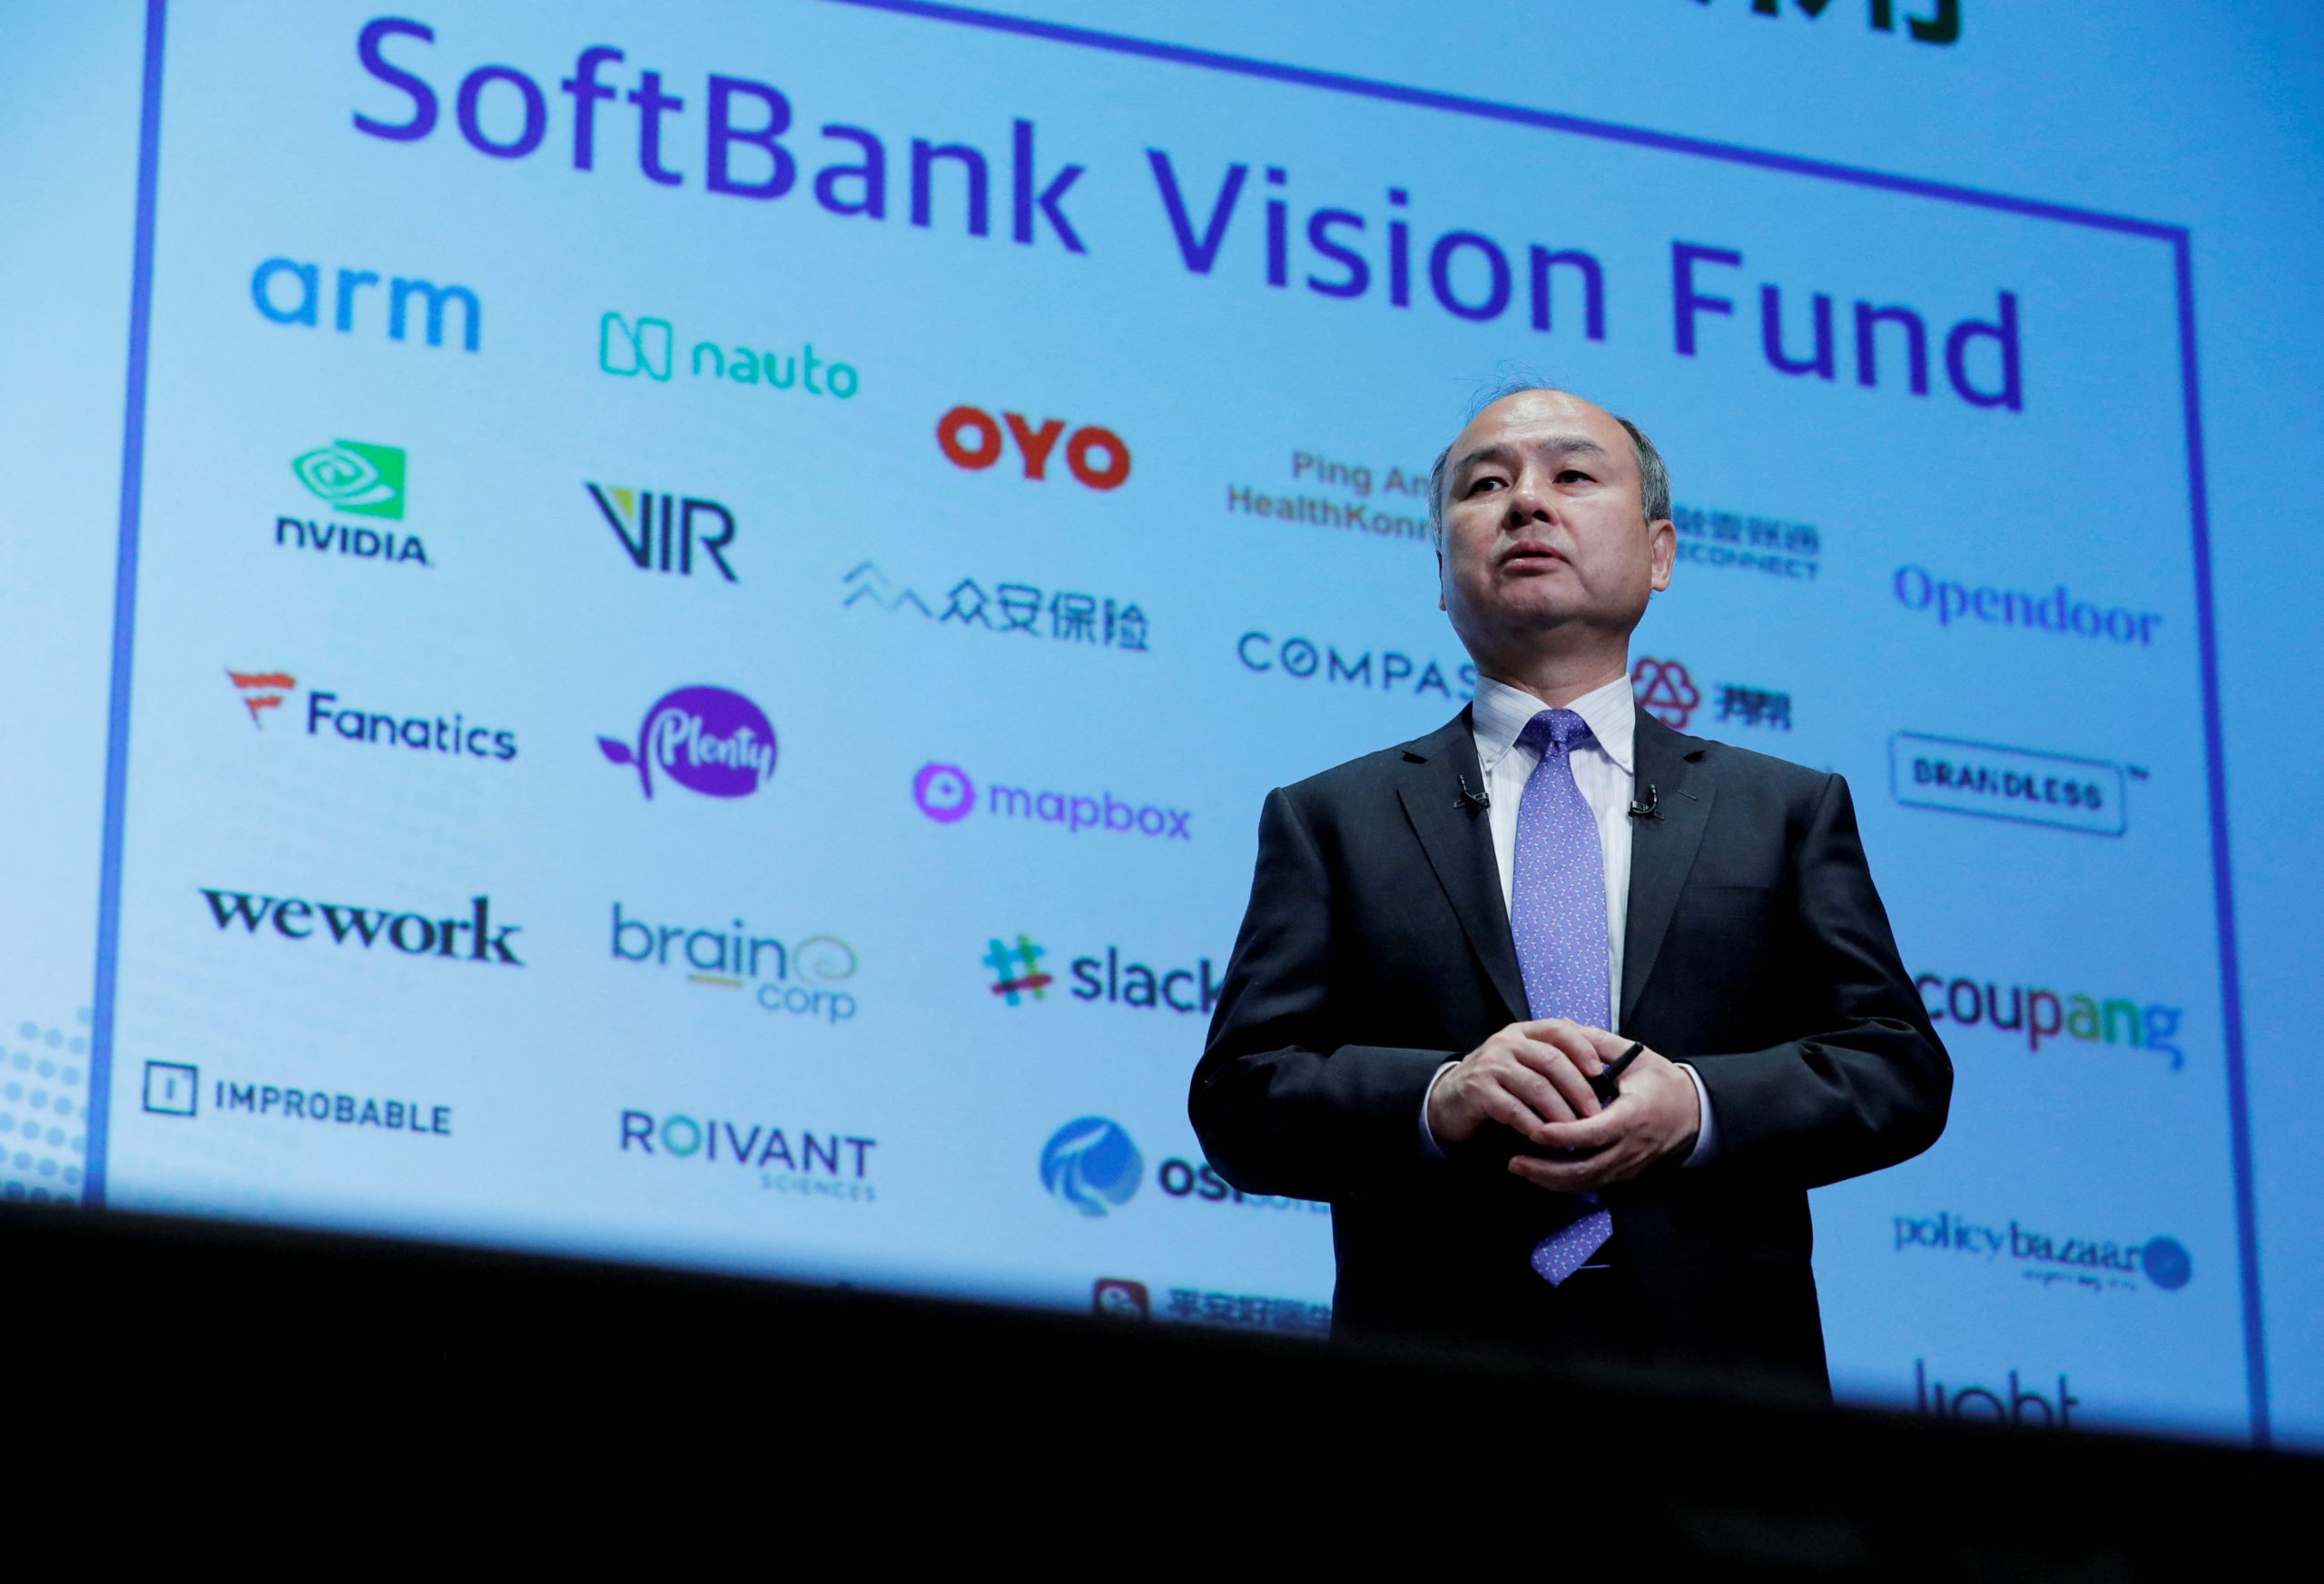 SoftBank investors focus on upcoming Arm IPO at Q4 earnings